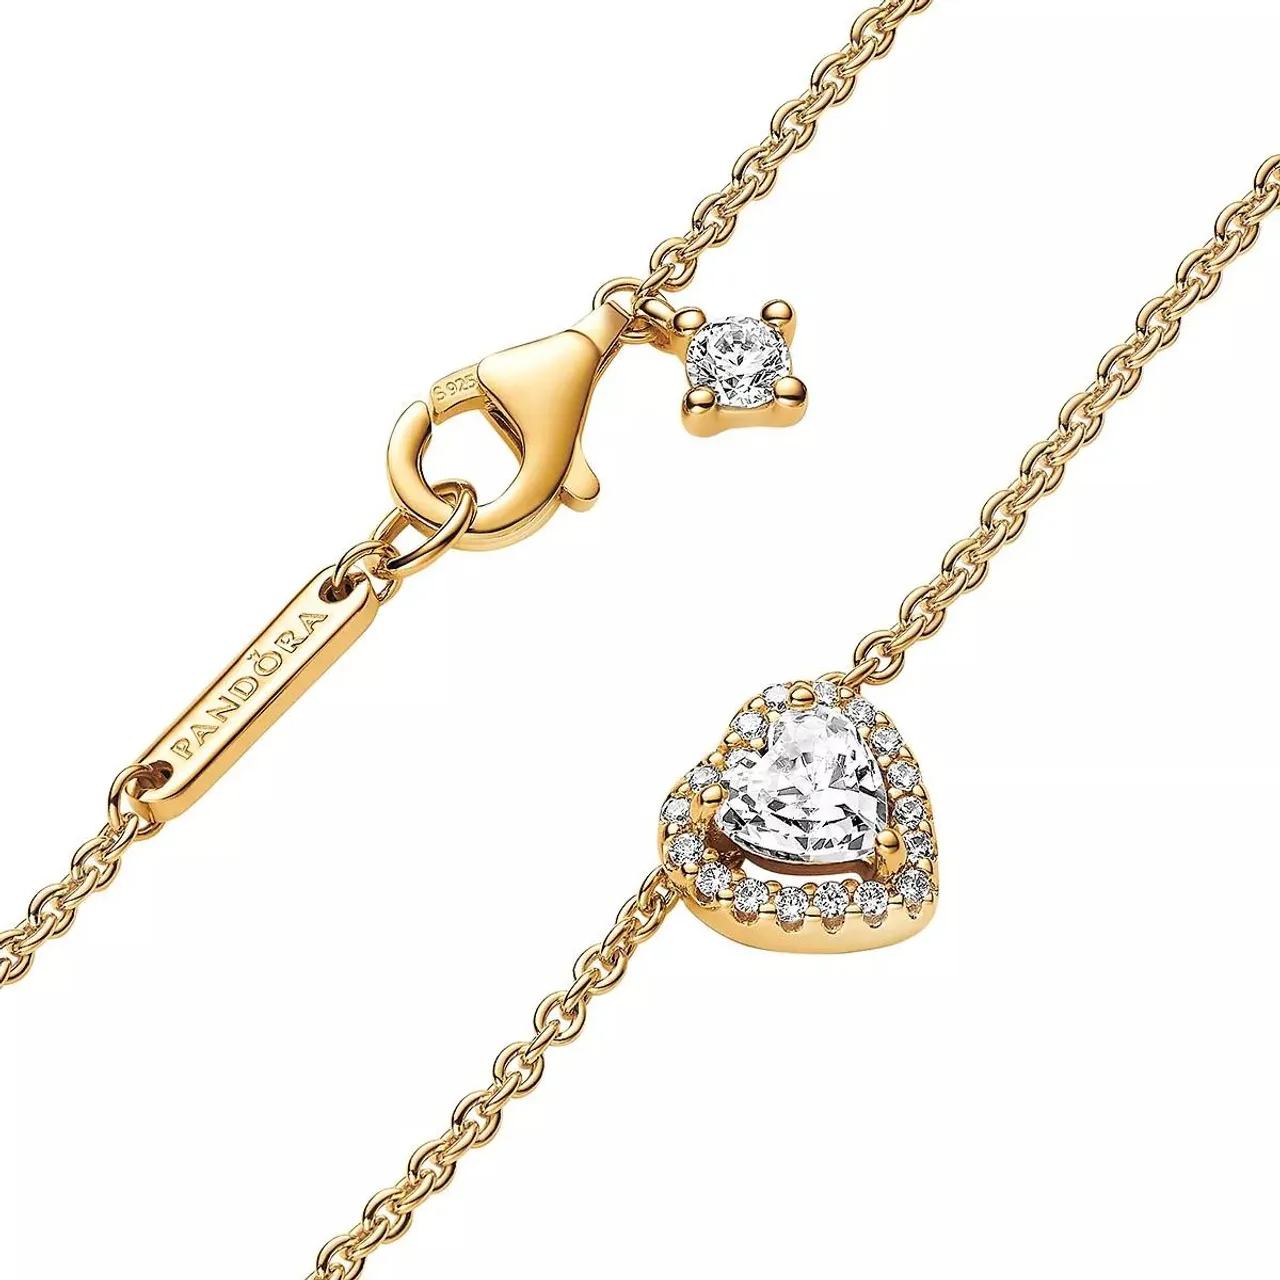 Pandora Necklaces - Heart 14k gold-plated collier with clear cubic zir - silver - Necklaces for ladies